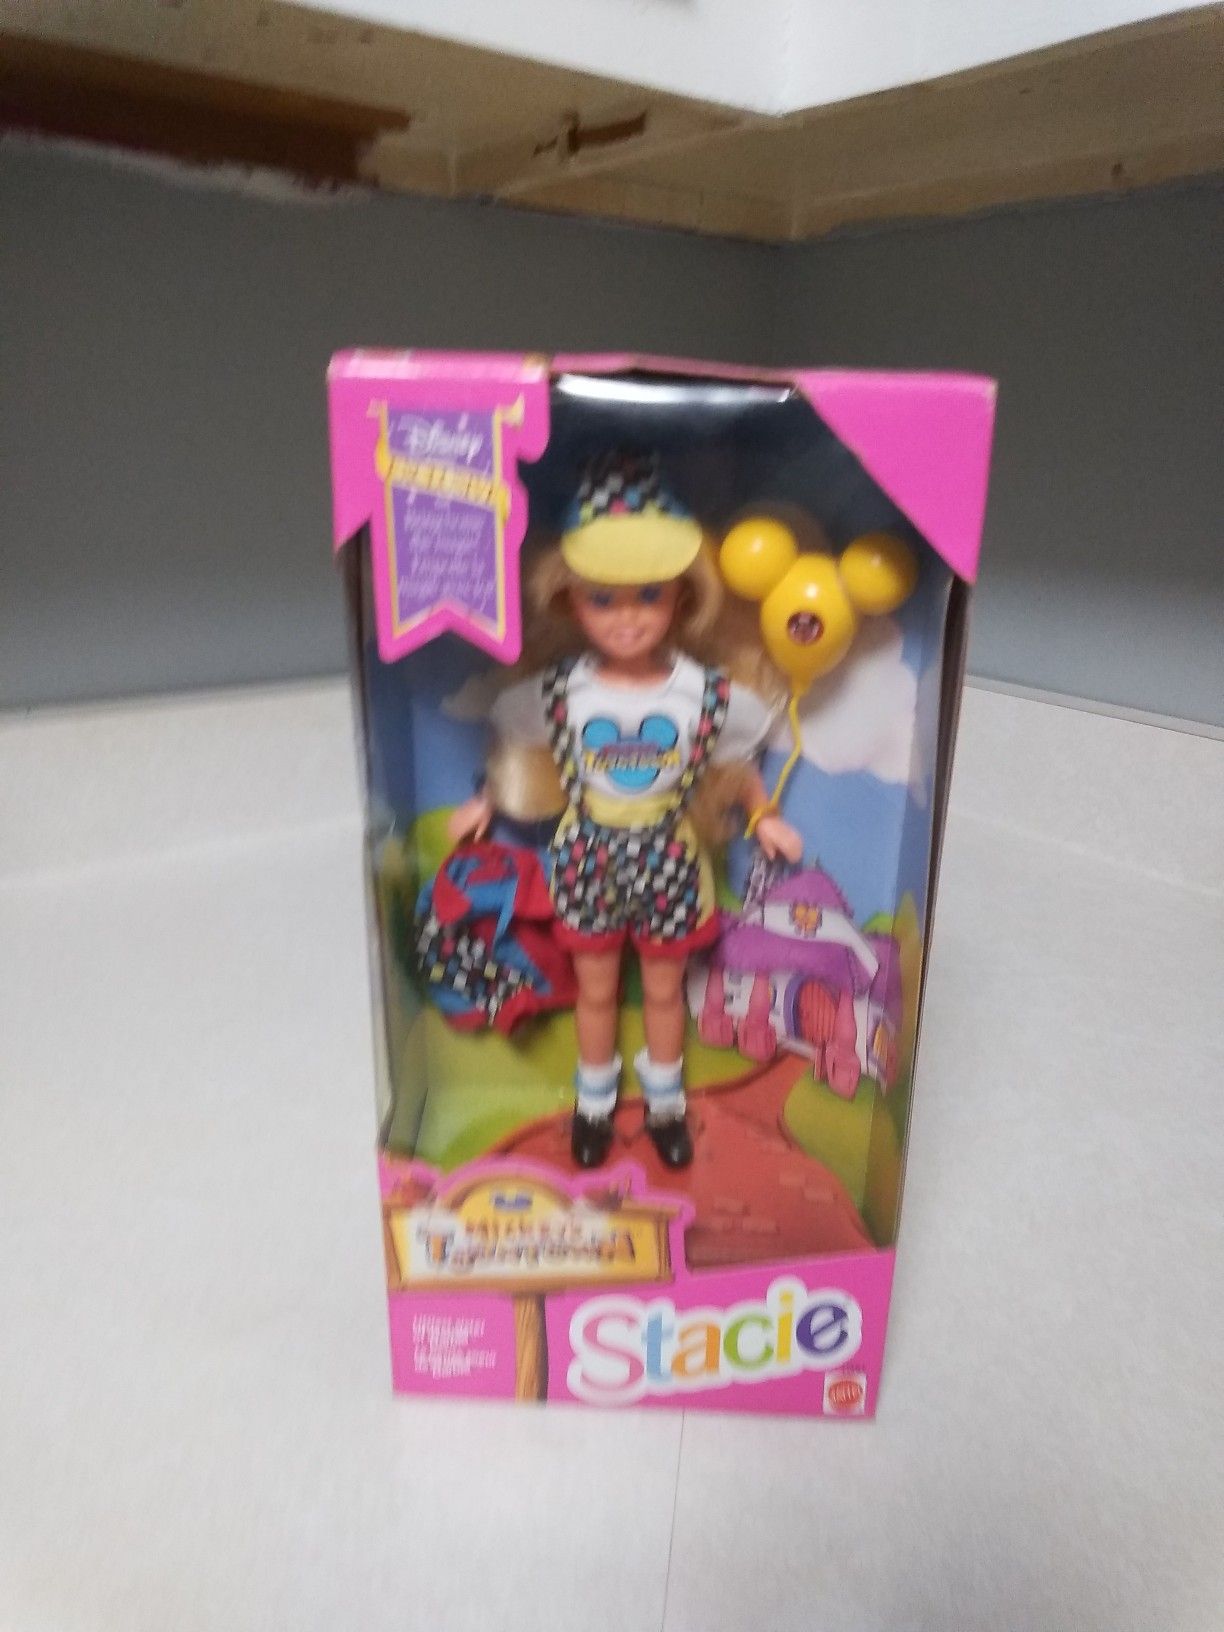 Disney Exclusive Mickey's Toontown Stacie Doll, Littlest Sister of Barbie Doll is a 1993 Mattel production, Disney Exclusive Doll. Model #11587.